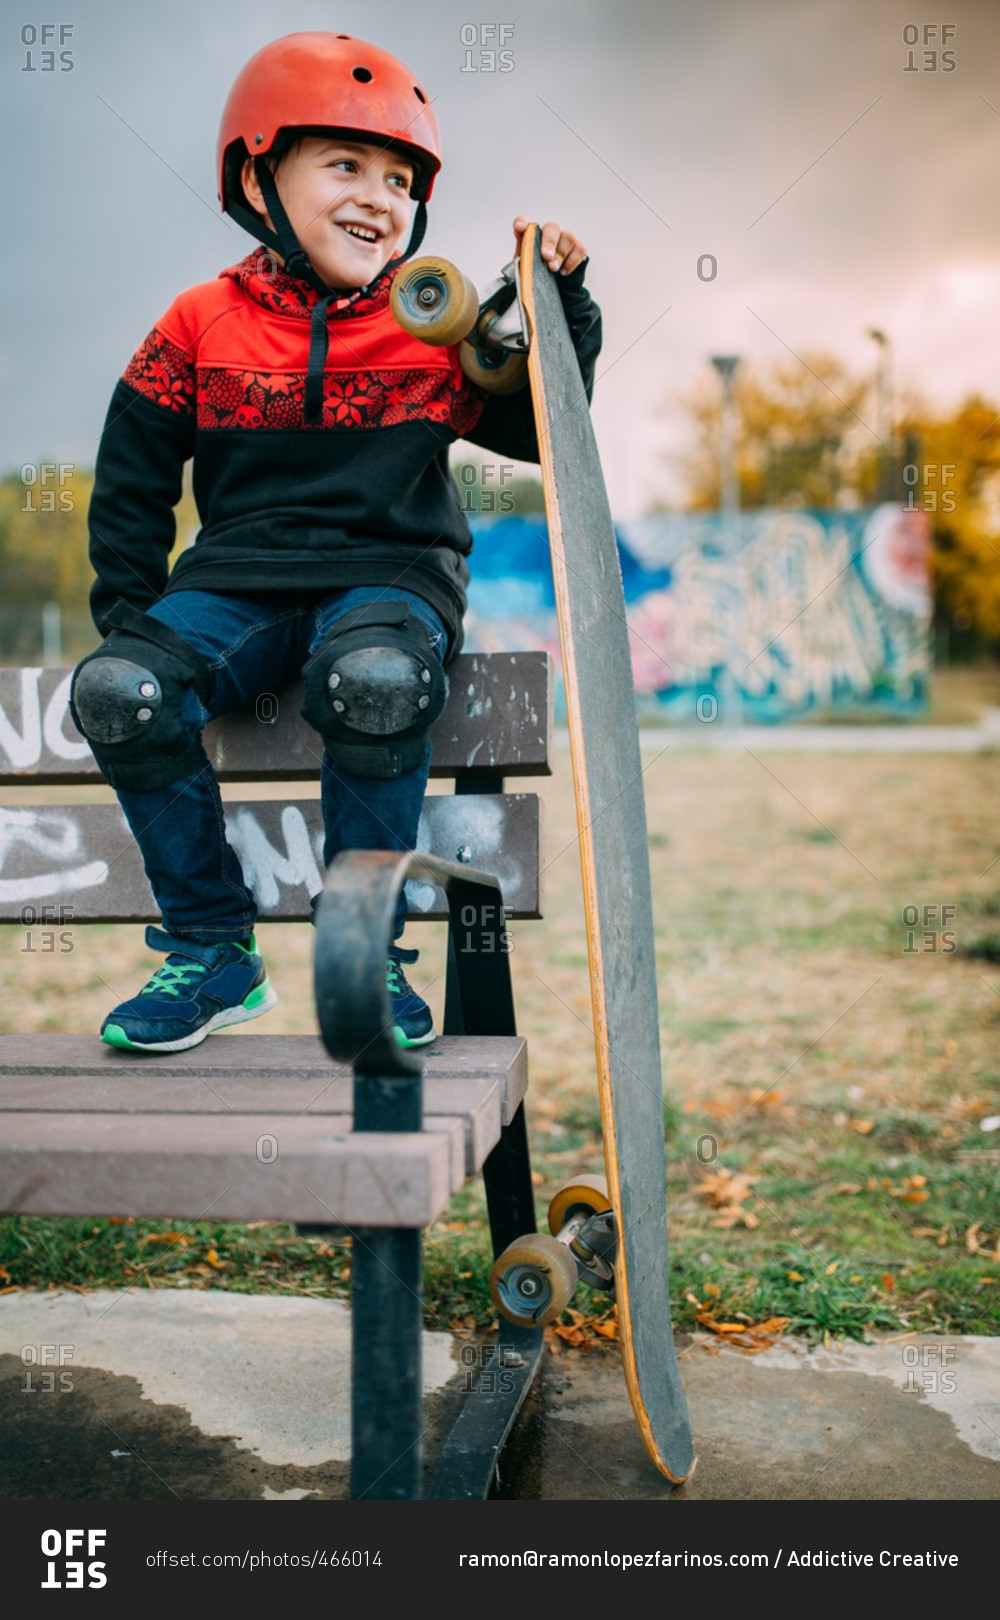 Smiling kid with red helmet and knee pads with long board on a bench at the skate park